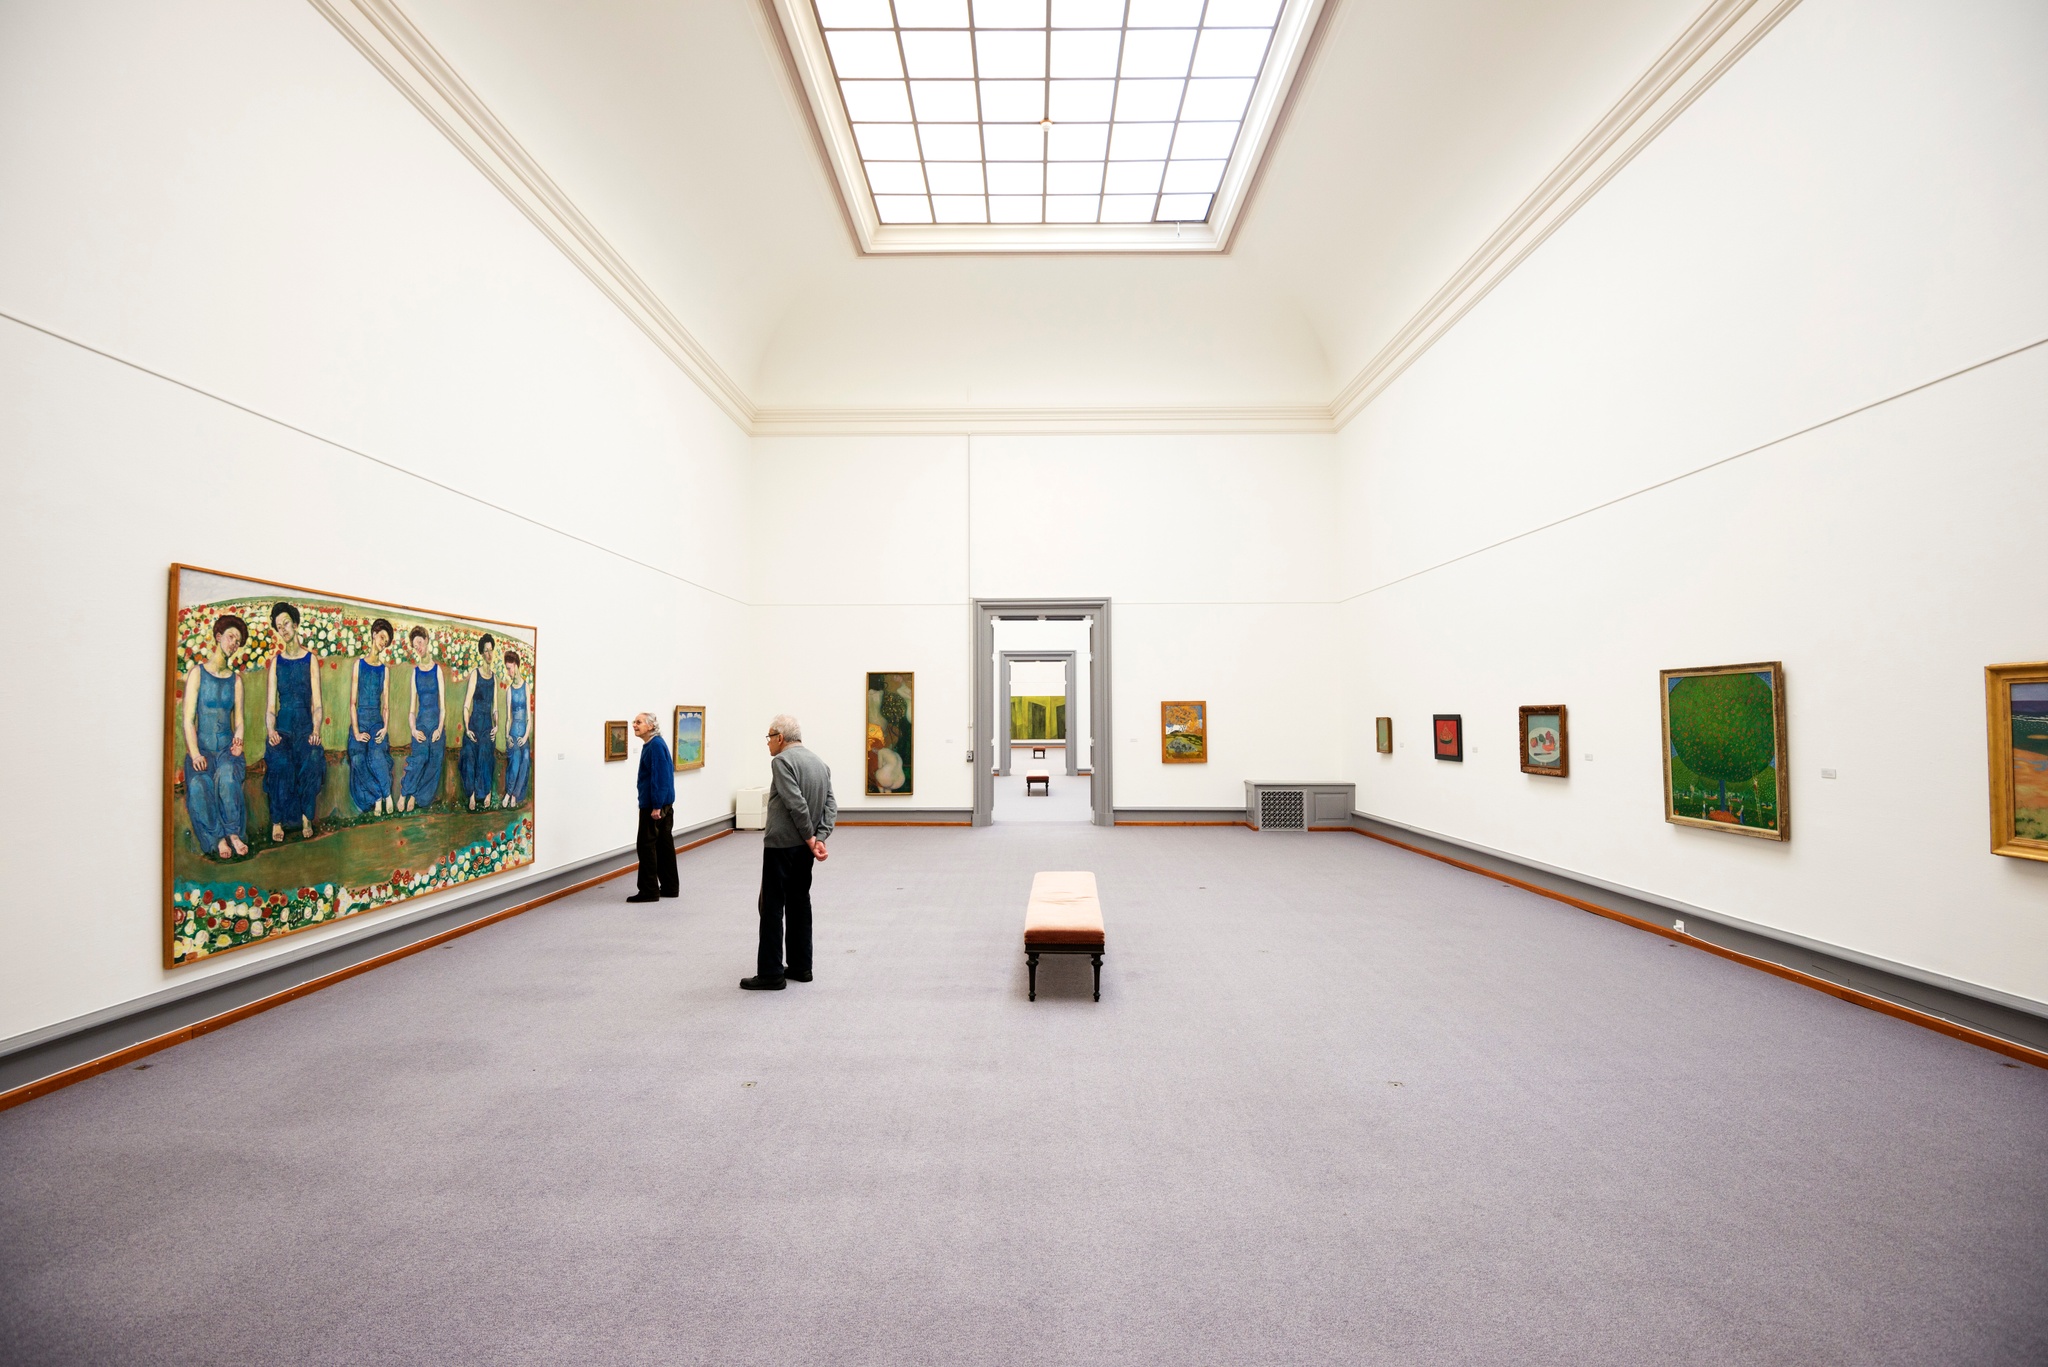 Two men look at a painting in a large white-wall museum gallery